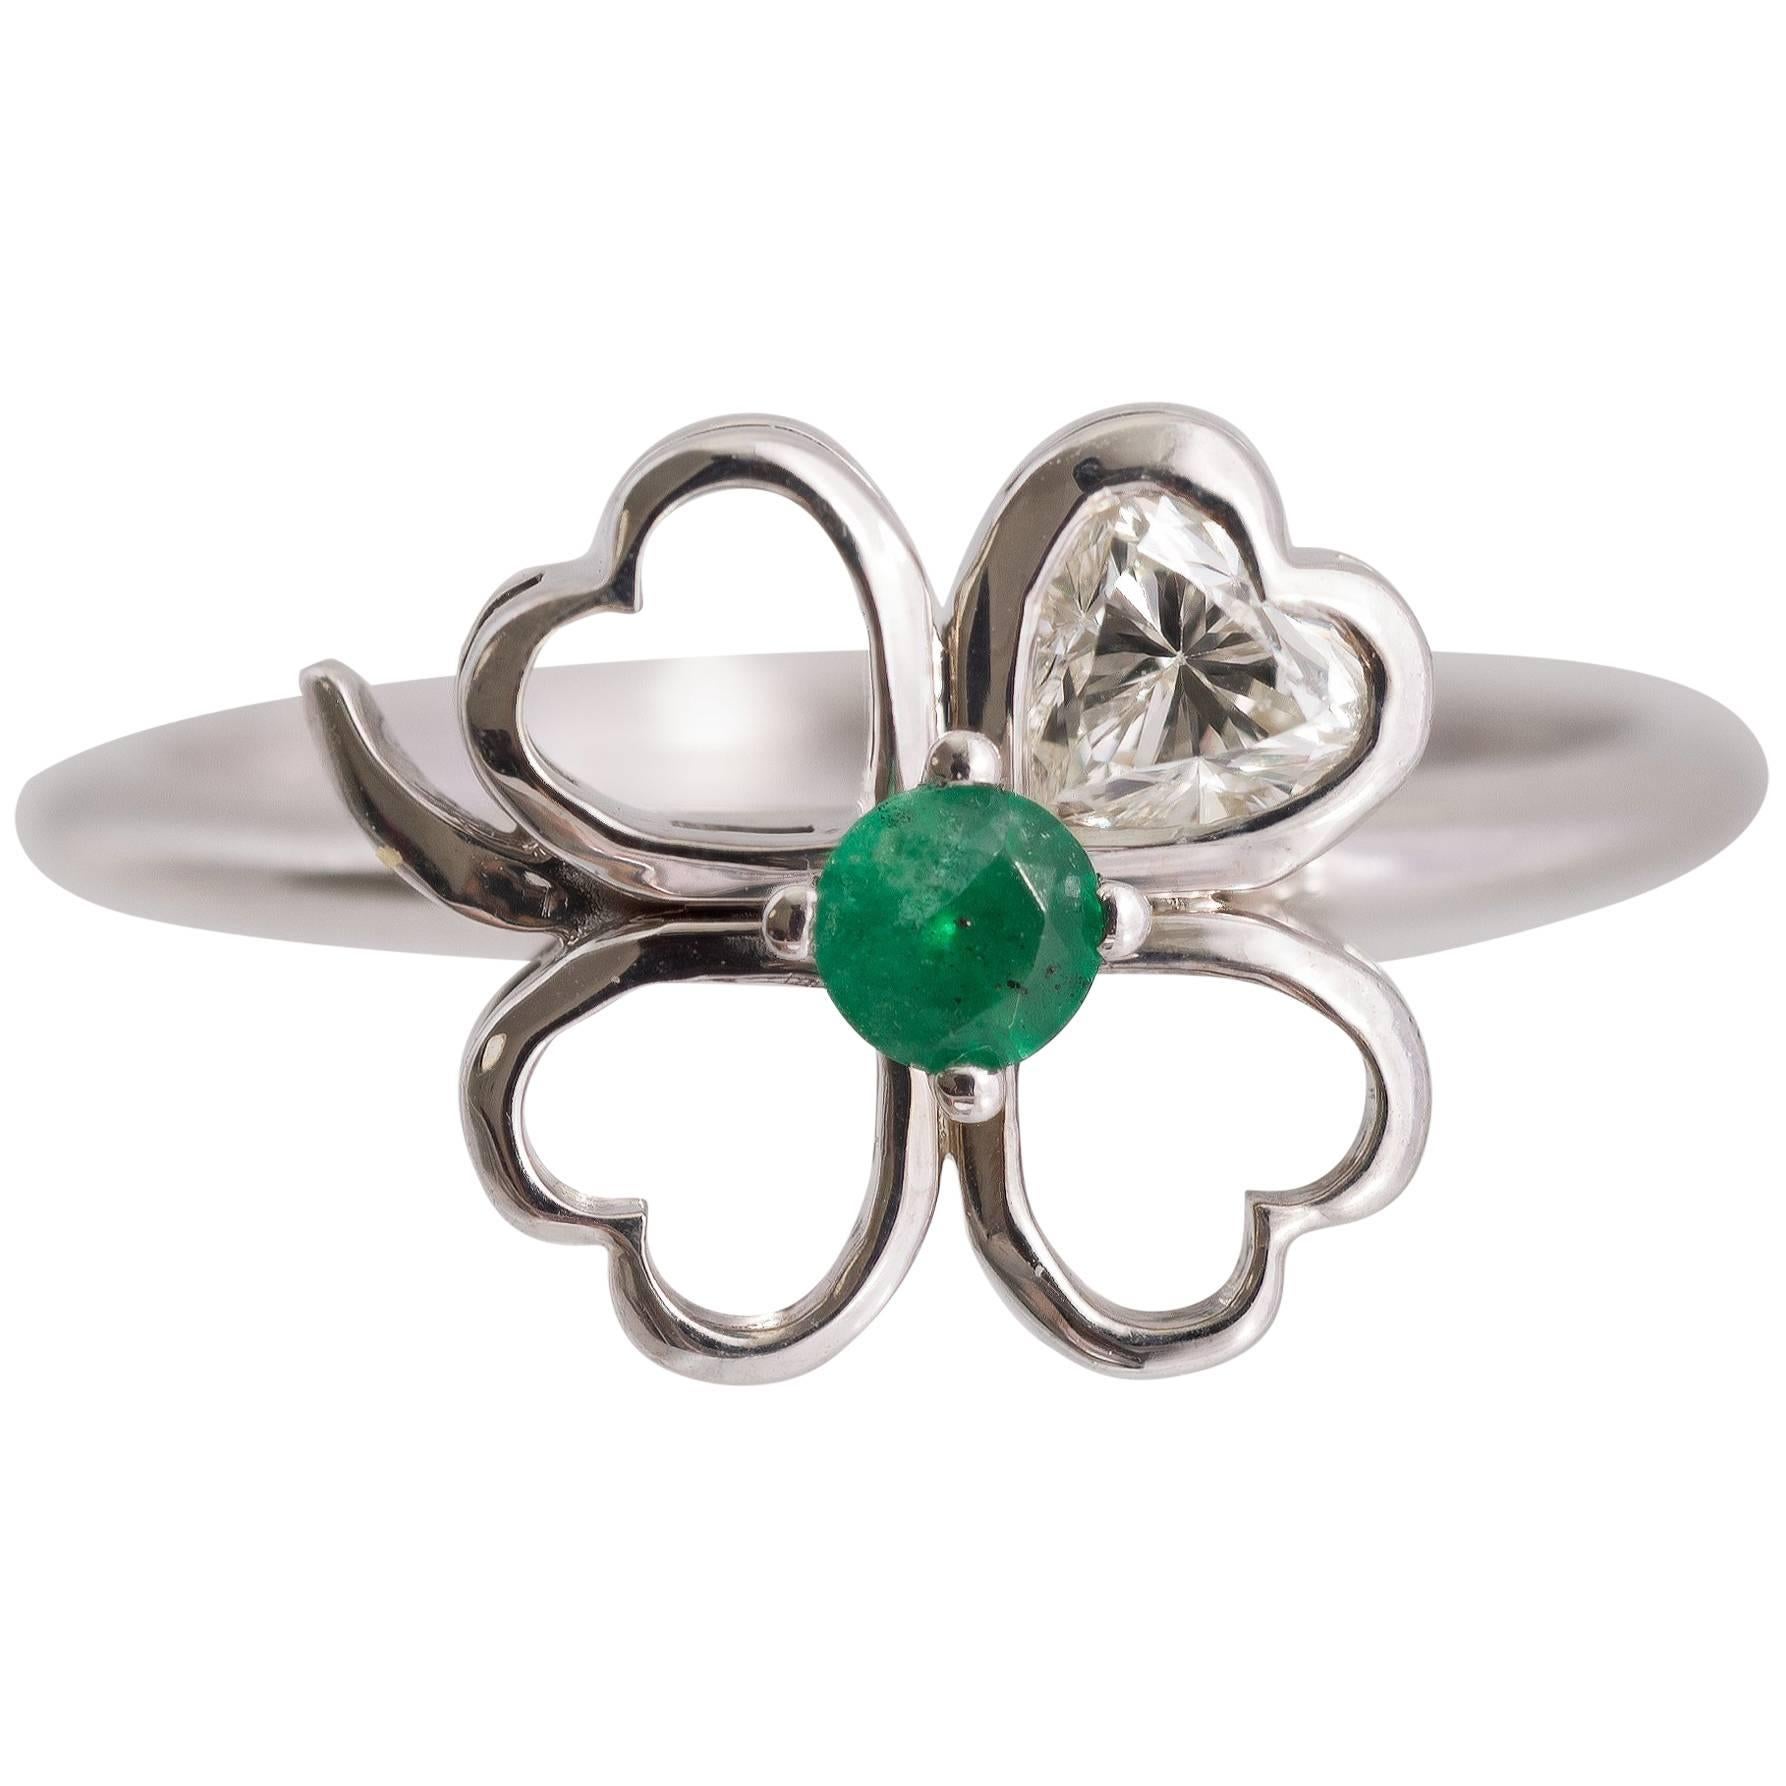 Four-Leaf Clover Motif Diamond and Emerald Ring 